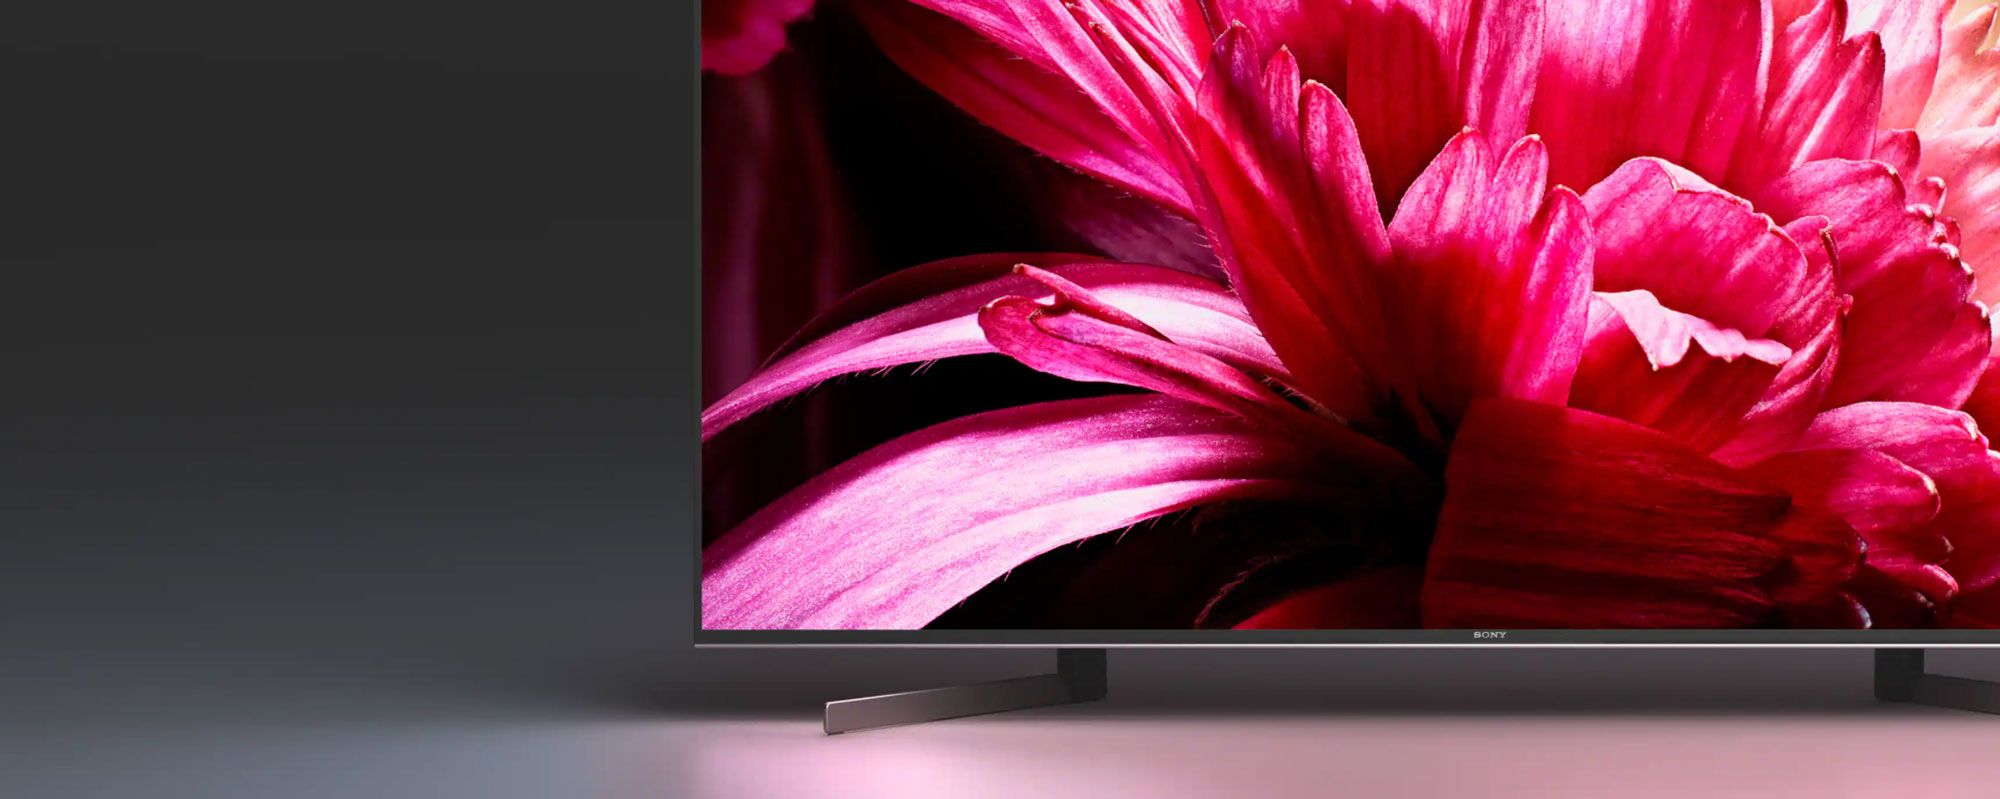 Sony image of tv with vibrant pink flower on screen